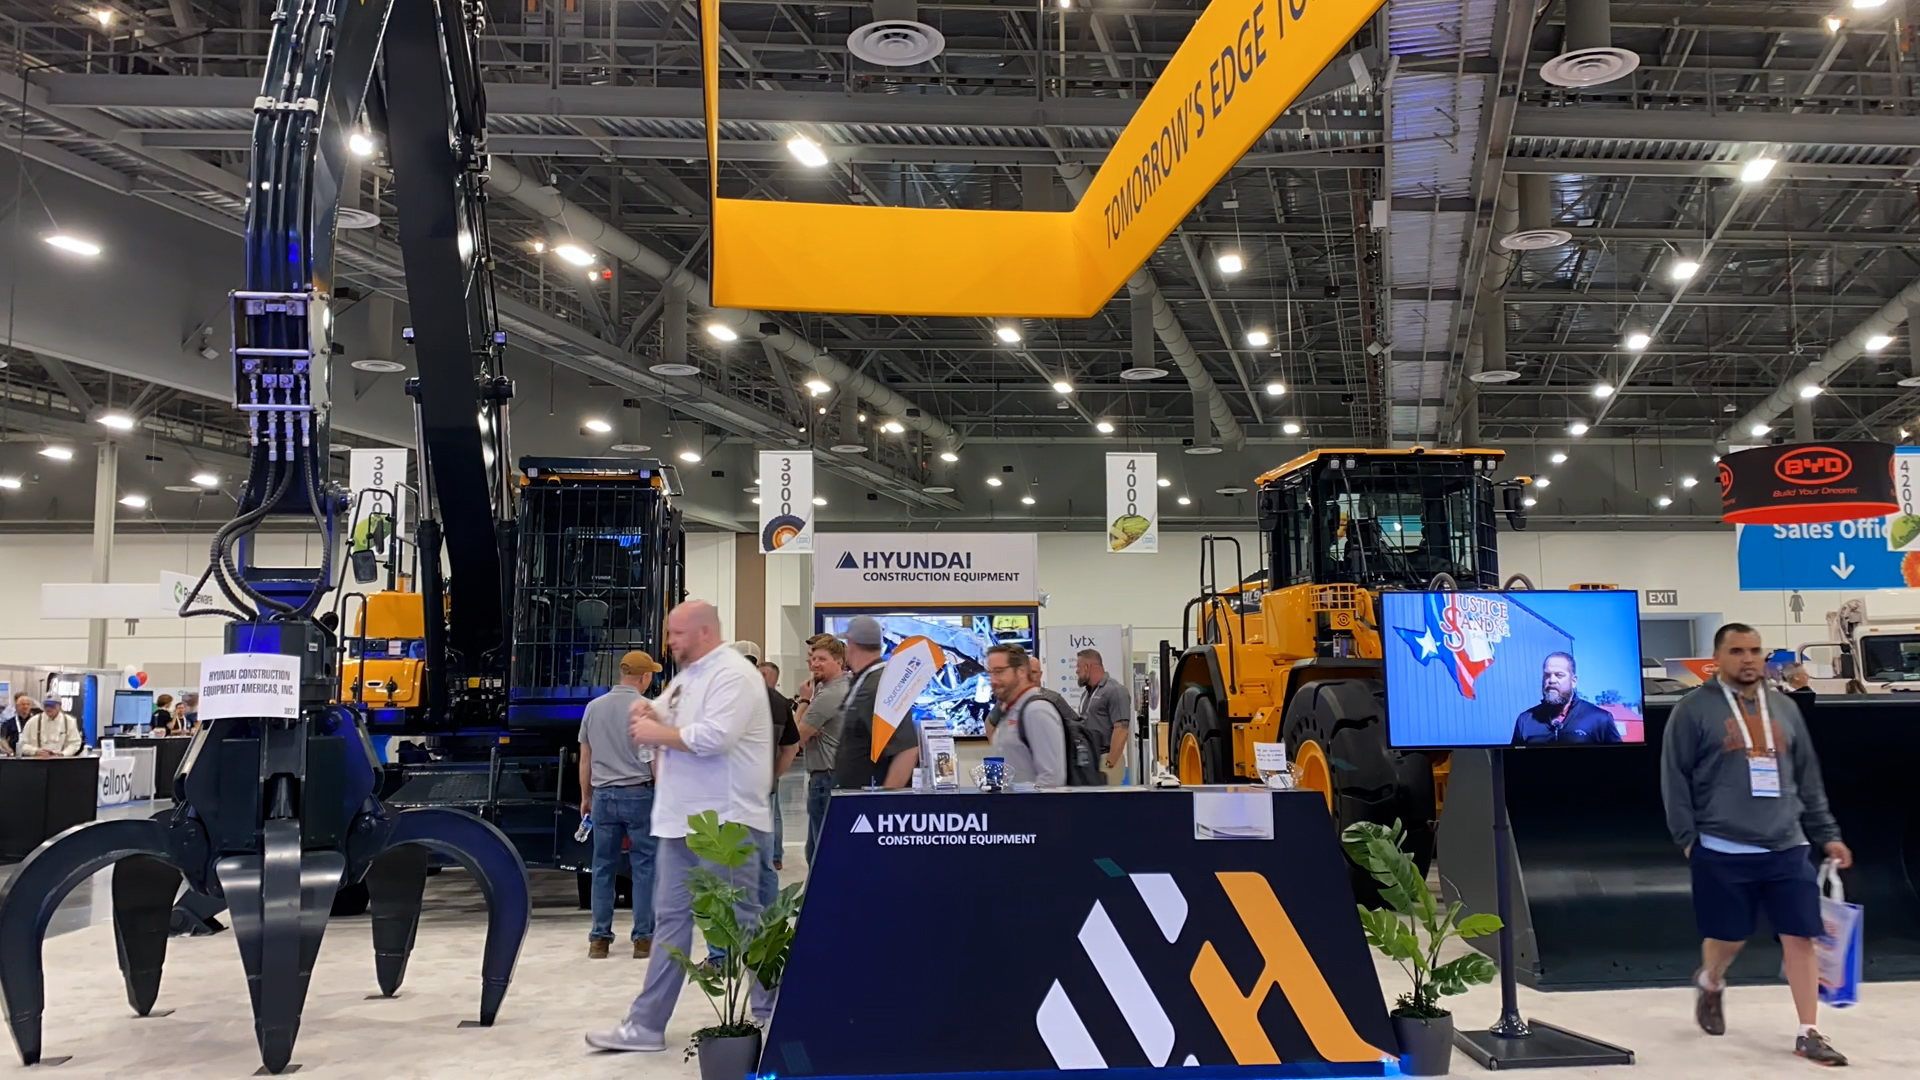 Hyundai Construction Equipment Attends Waste Expo in Las Vegas, NV, May 7th-9th